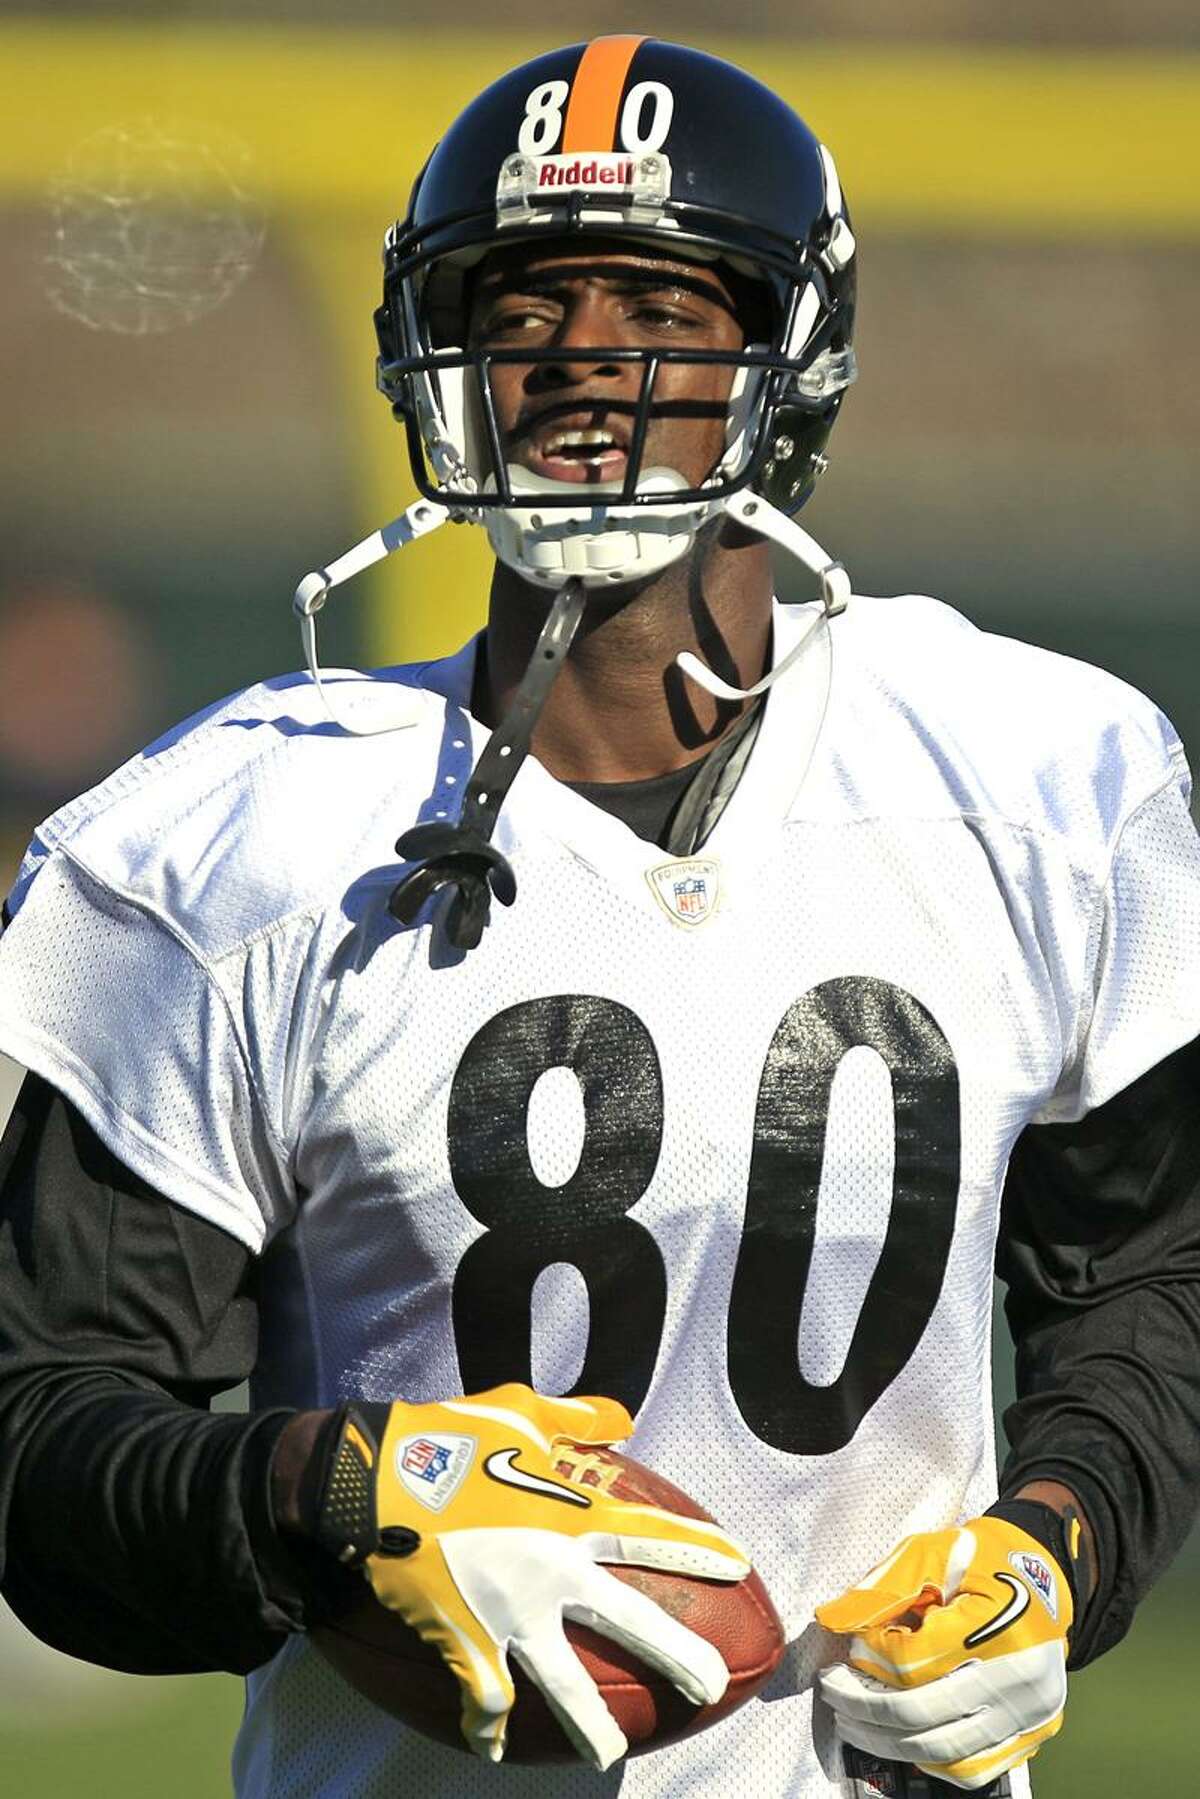 Newly signed Pittsburgh Steelers wide receiver Plaxico Burress (80) runs a drill during NFL football practice, Wednesday, Nov. 21, 2012, in Pittsburgh. Burress returned to the team that drafted him a dozen years ago on Wednesday hungry, humble and eager to prove there's still some life left in a career that's never quite lived up to his own outsized expectations. (AP Photo/Gene J. Puskar)